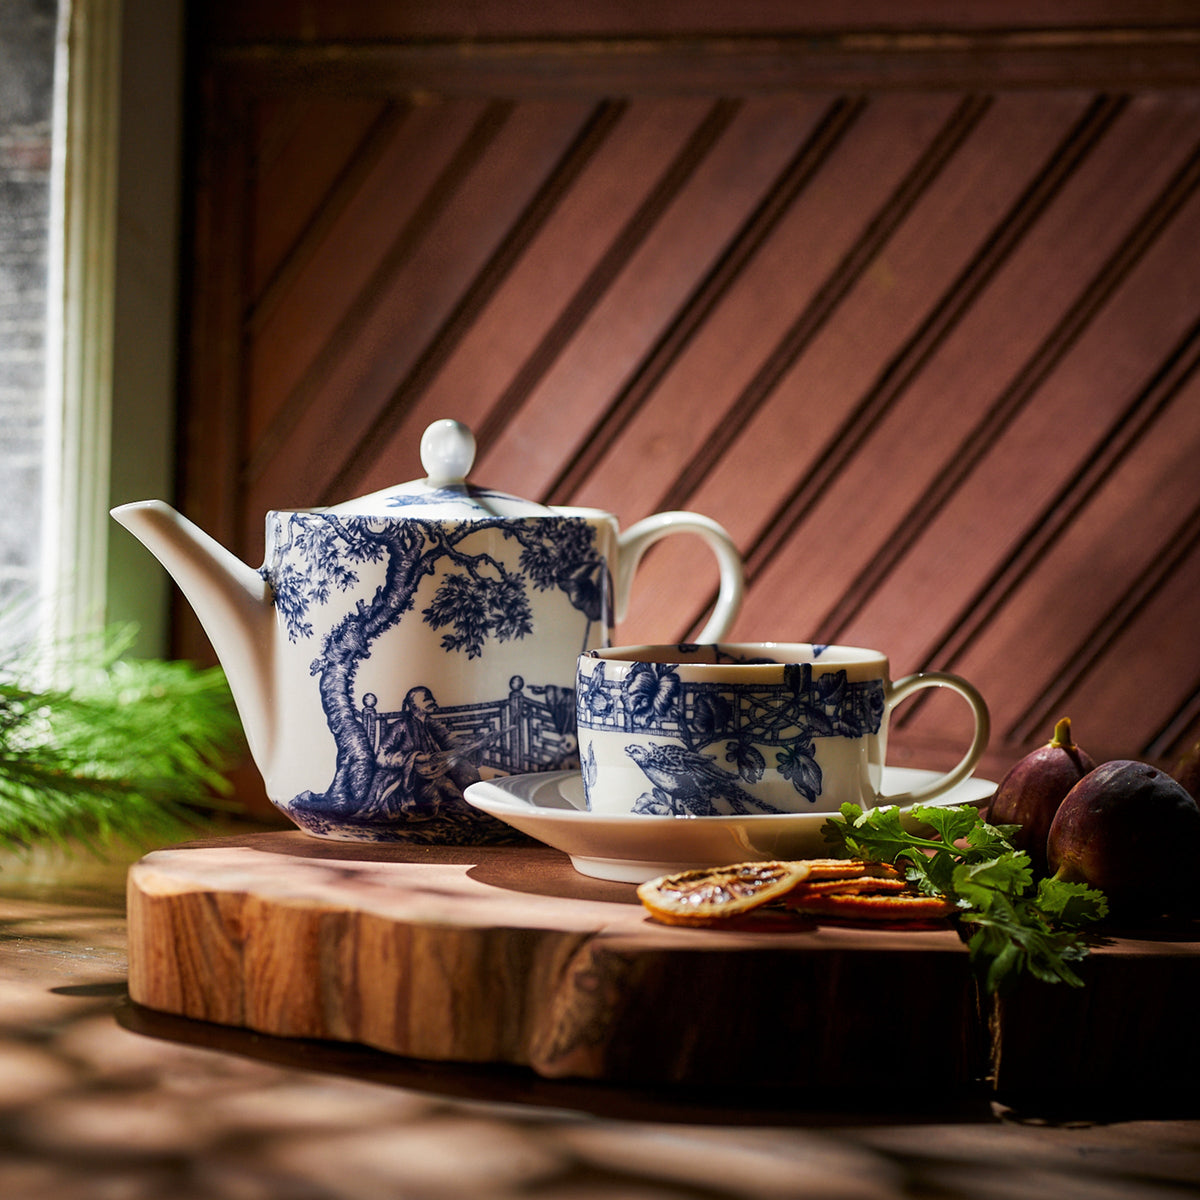 A Chinoiserie Toile teapot and Caskata Artisanal Home Chinoiserie Toile Cups &amp; Saucers, Set of 2 with blue-and-white patterns sit on a wooden board with figs and sliced dried fruit, set against a warmly lit wooden backdrop.